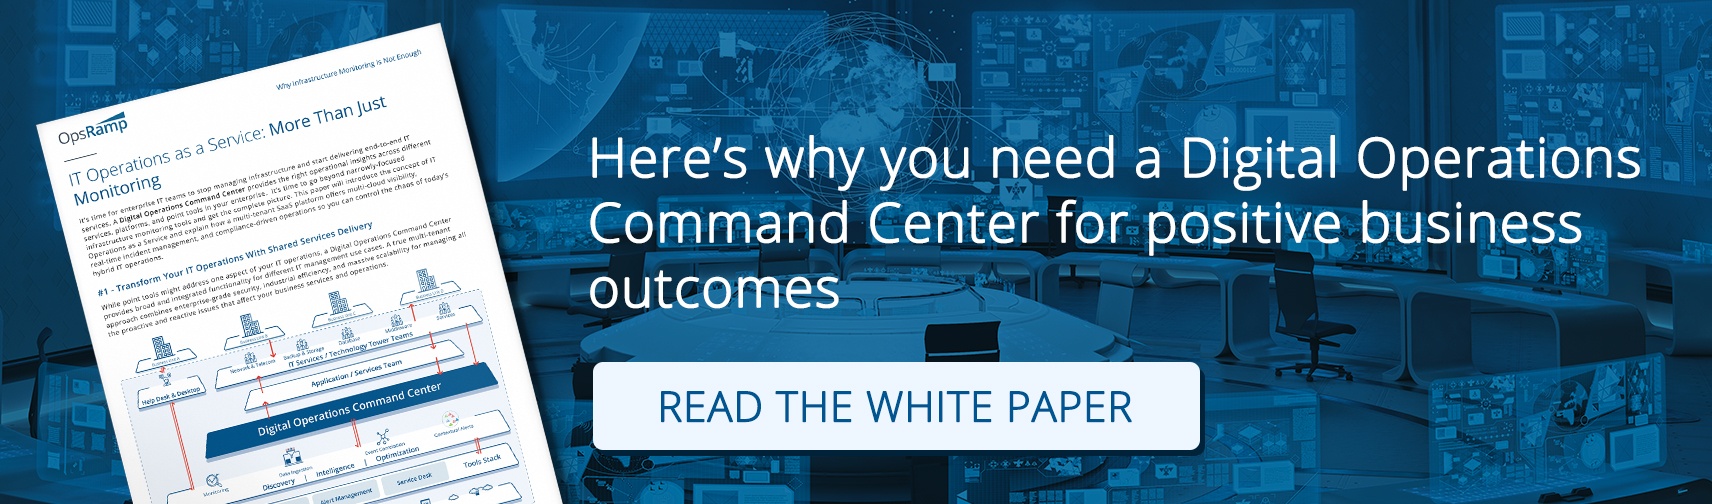 Here's Why You Need A Digital Operations Command Center